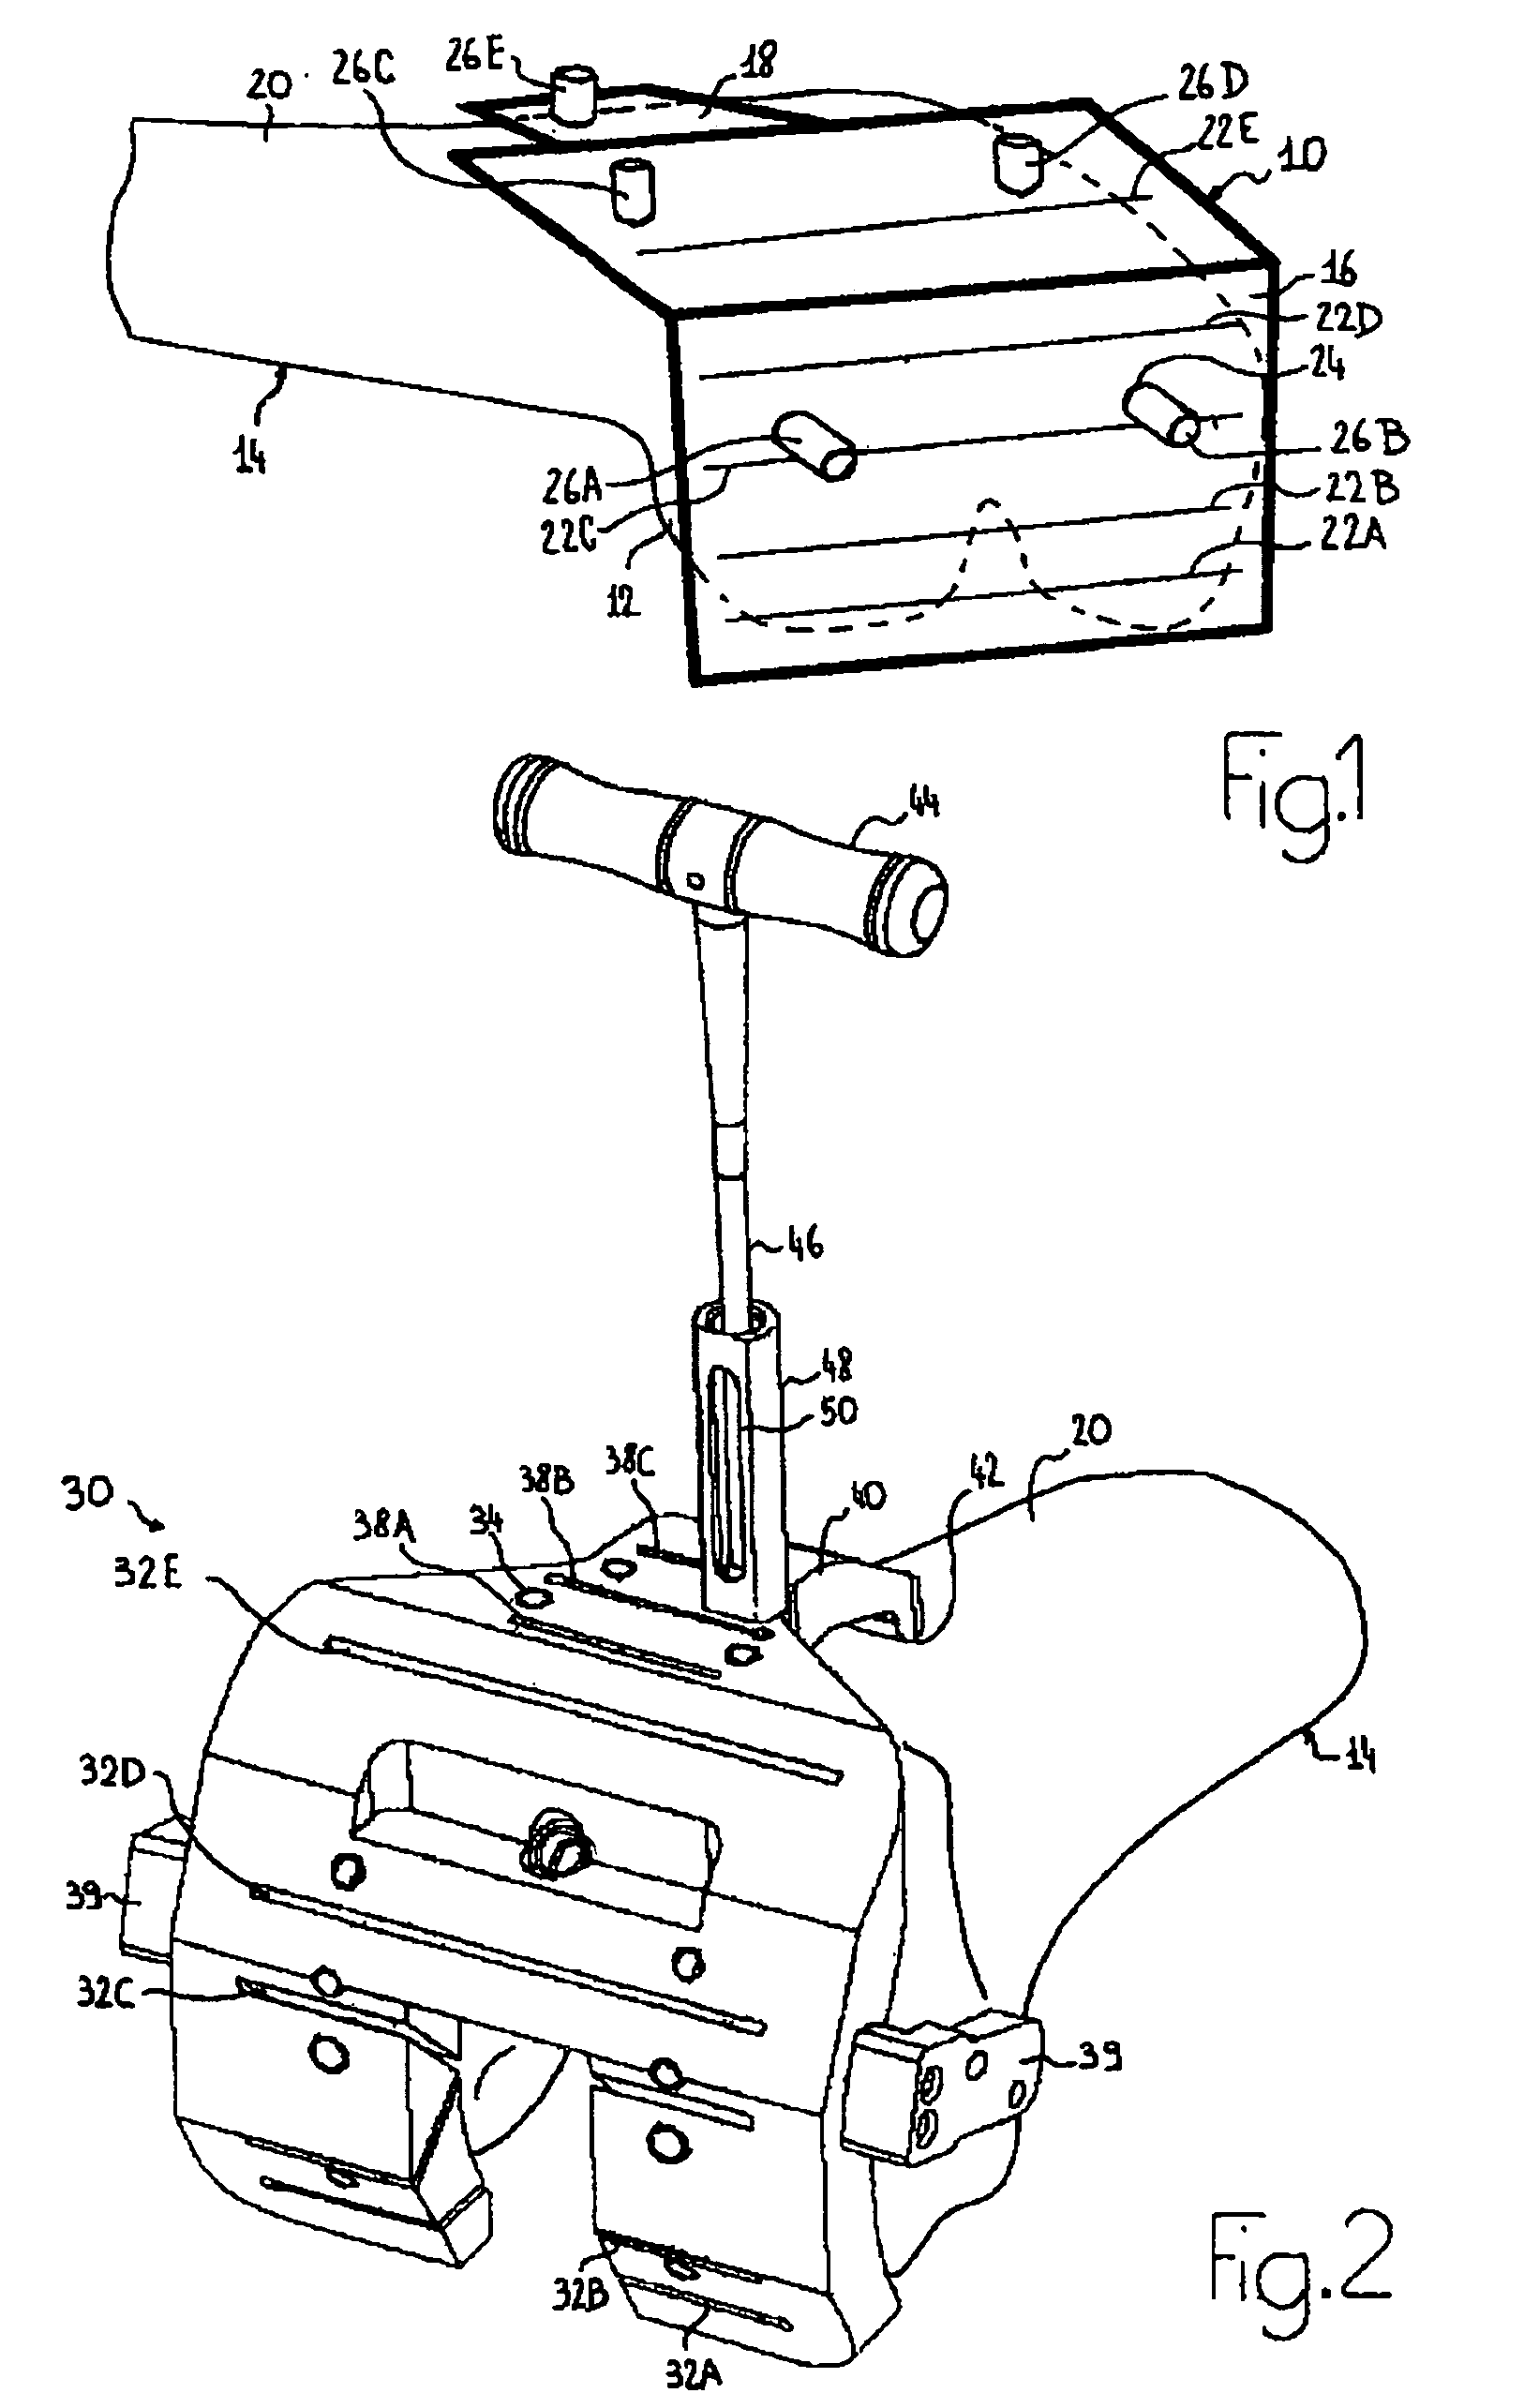 Device for positioning a bone cutting guide